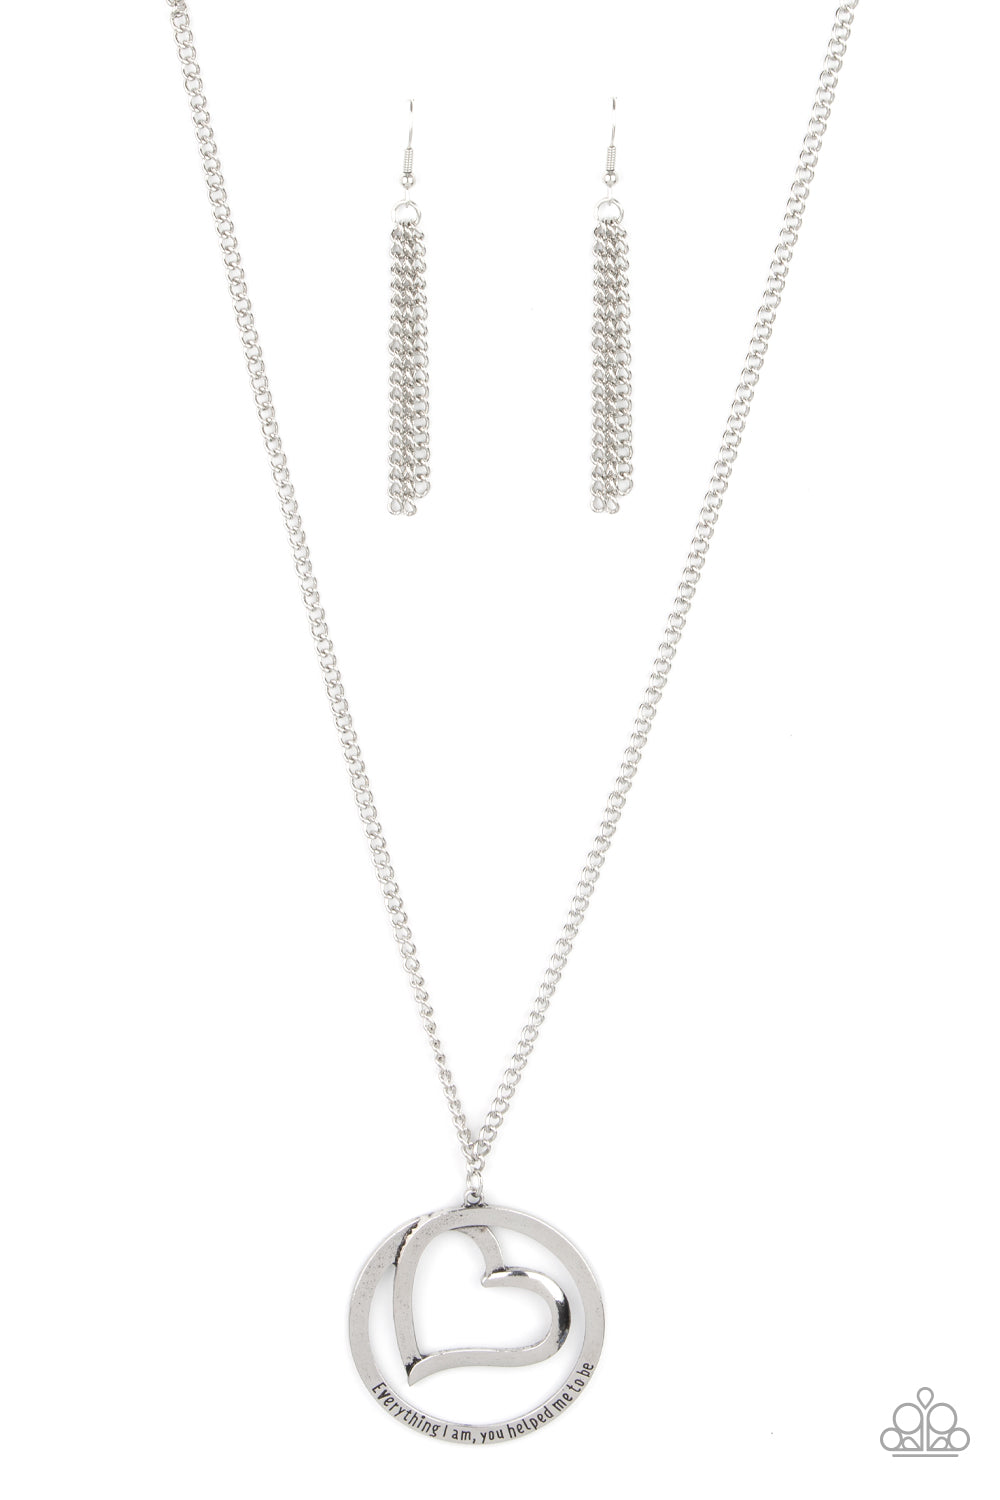 Positively Perfect Paparazzi Accessories Necklace with Earrings - Silver